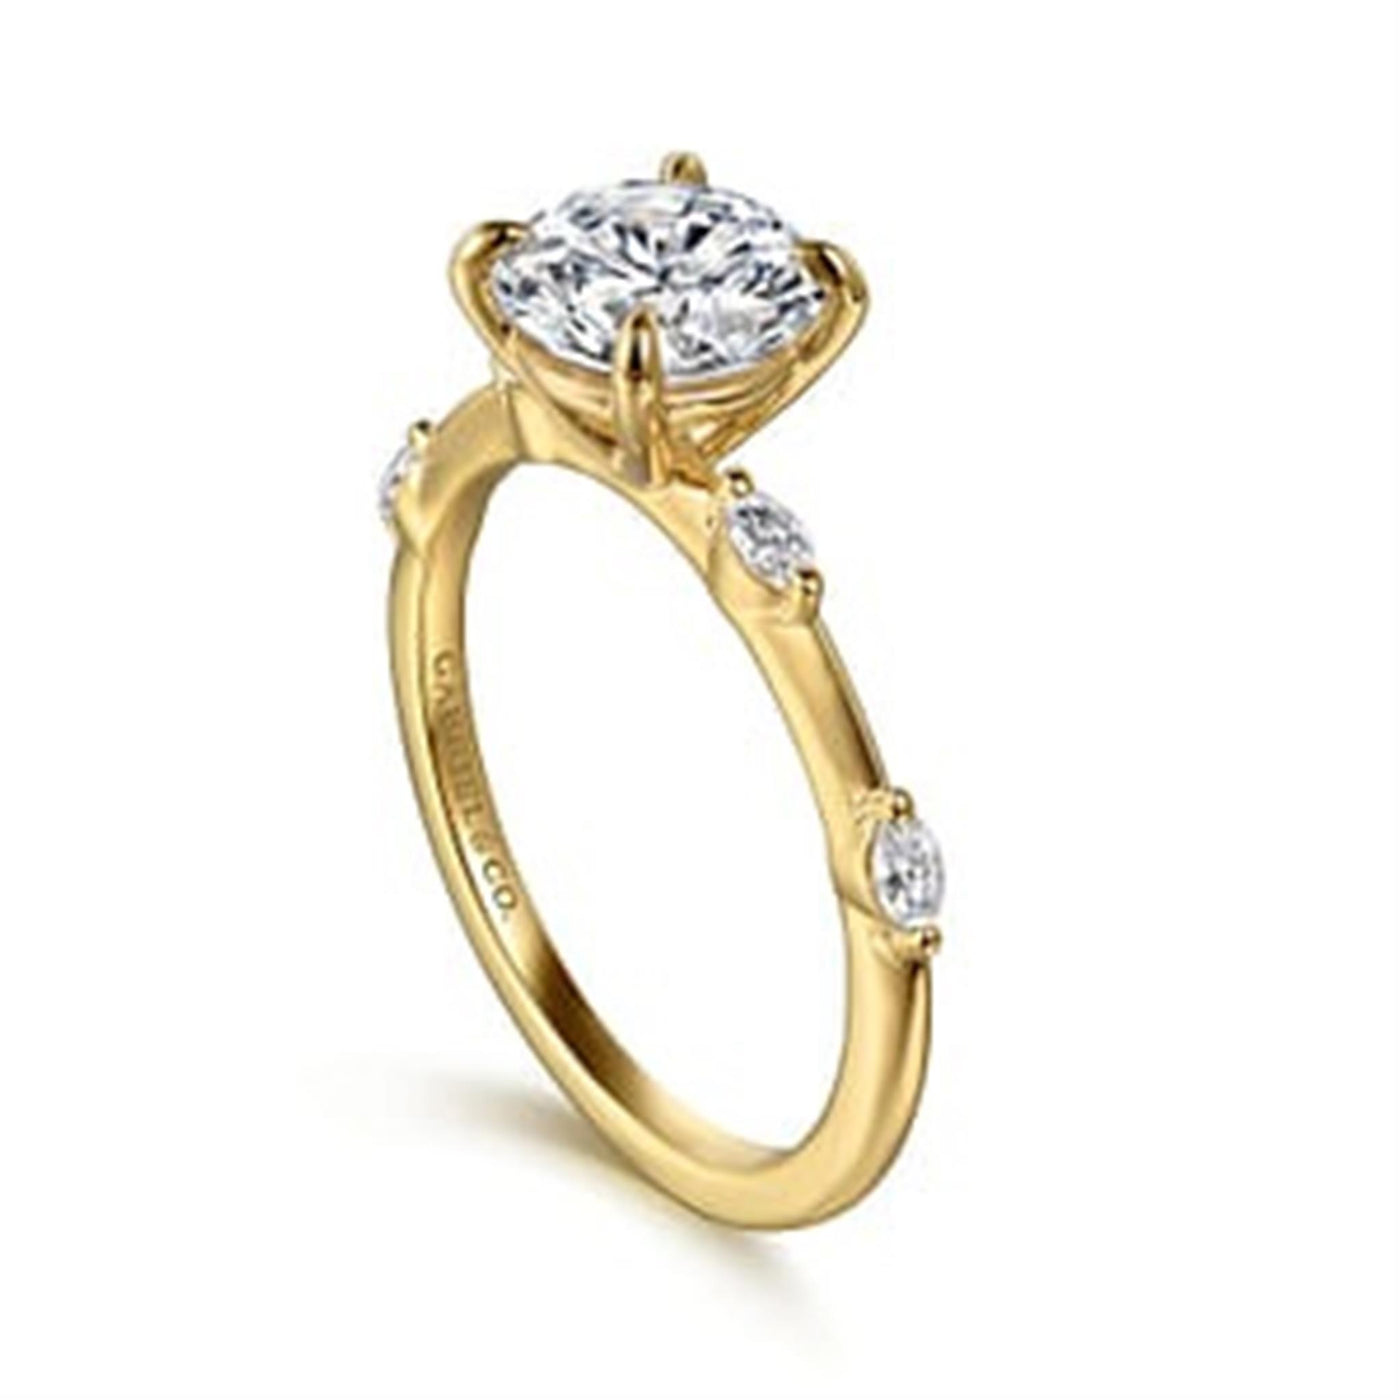 Gabriel - Starlight Collection 14K Yellow Gold 0.16ctw 4 Prong Style Diamond Semi-Mount Engagement Ring